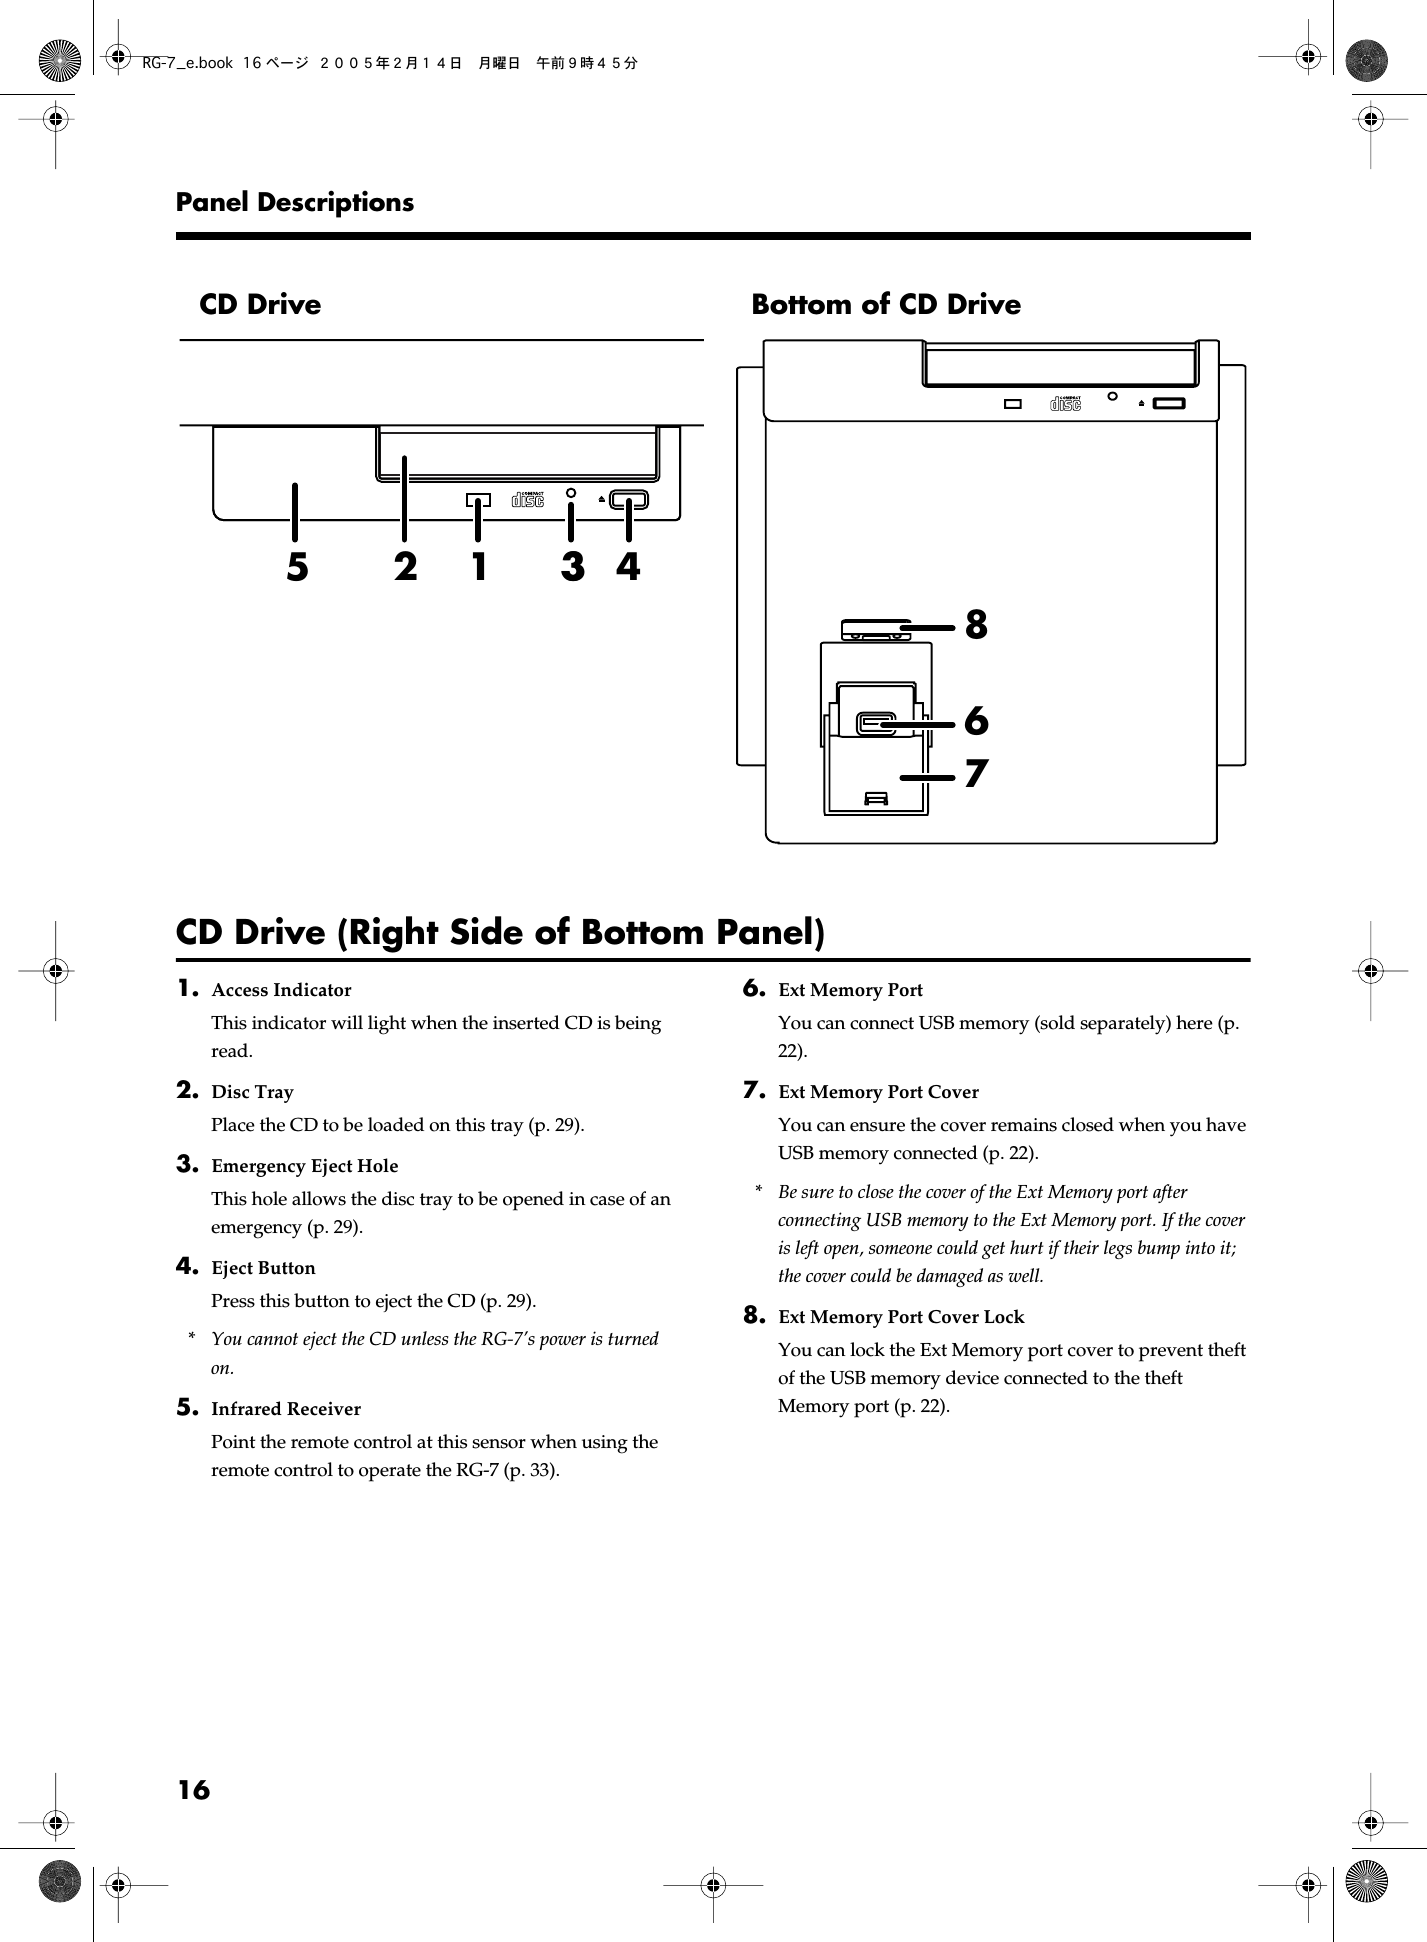  16Panel Descriptions CD Drive (Right Side of Bottom Panel) 1. Access Indicator This indicator will light when the inserted CD is being read. 2. Disc Tray Place the CD to be loaded on this tray (p. 29). 3. Emergency Eject Hole This hole allows the disc tray to be opened in case of an emergency (p. 29). 4. Eject Button Press this button to eject the CD (p. 29).  * You cannot eject the CD unless the RG-7’s power is turned on. 5. Infrared Receiver Point the remote control at this sensor when using the remote control to operate the RG-7 (p. 33). 6. Ext Memory Port You can connect USB memory (sold separately) here (p. 22). 7. Ext Memory Port Cover You can ensure the cover remains closed when you have USB memory connected (p. 22). * Be sure to close the cover of the Ext Memory port after connecting USB memory to the Ext Memory port. If the cover is left open, someone could get hurt if their legs bump into it; the cover could be damaged as well. 8. Ext Memory Port Cover Lock You can lock the Ext Memory port cover to prevent theft of the USB memory device connected to the theft Memory port (p. 22).CD Drive Bottom of CD Drive54621 3783RG-7_e.book 16 ページ ２００５年２月１４日　月曜日　午前９時４５分